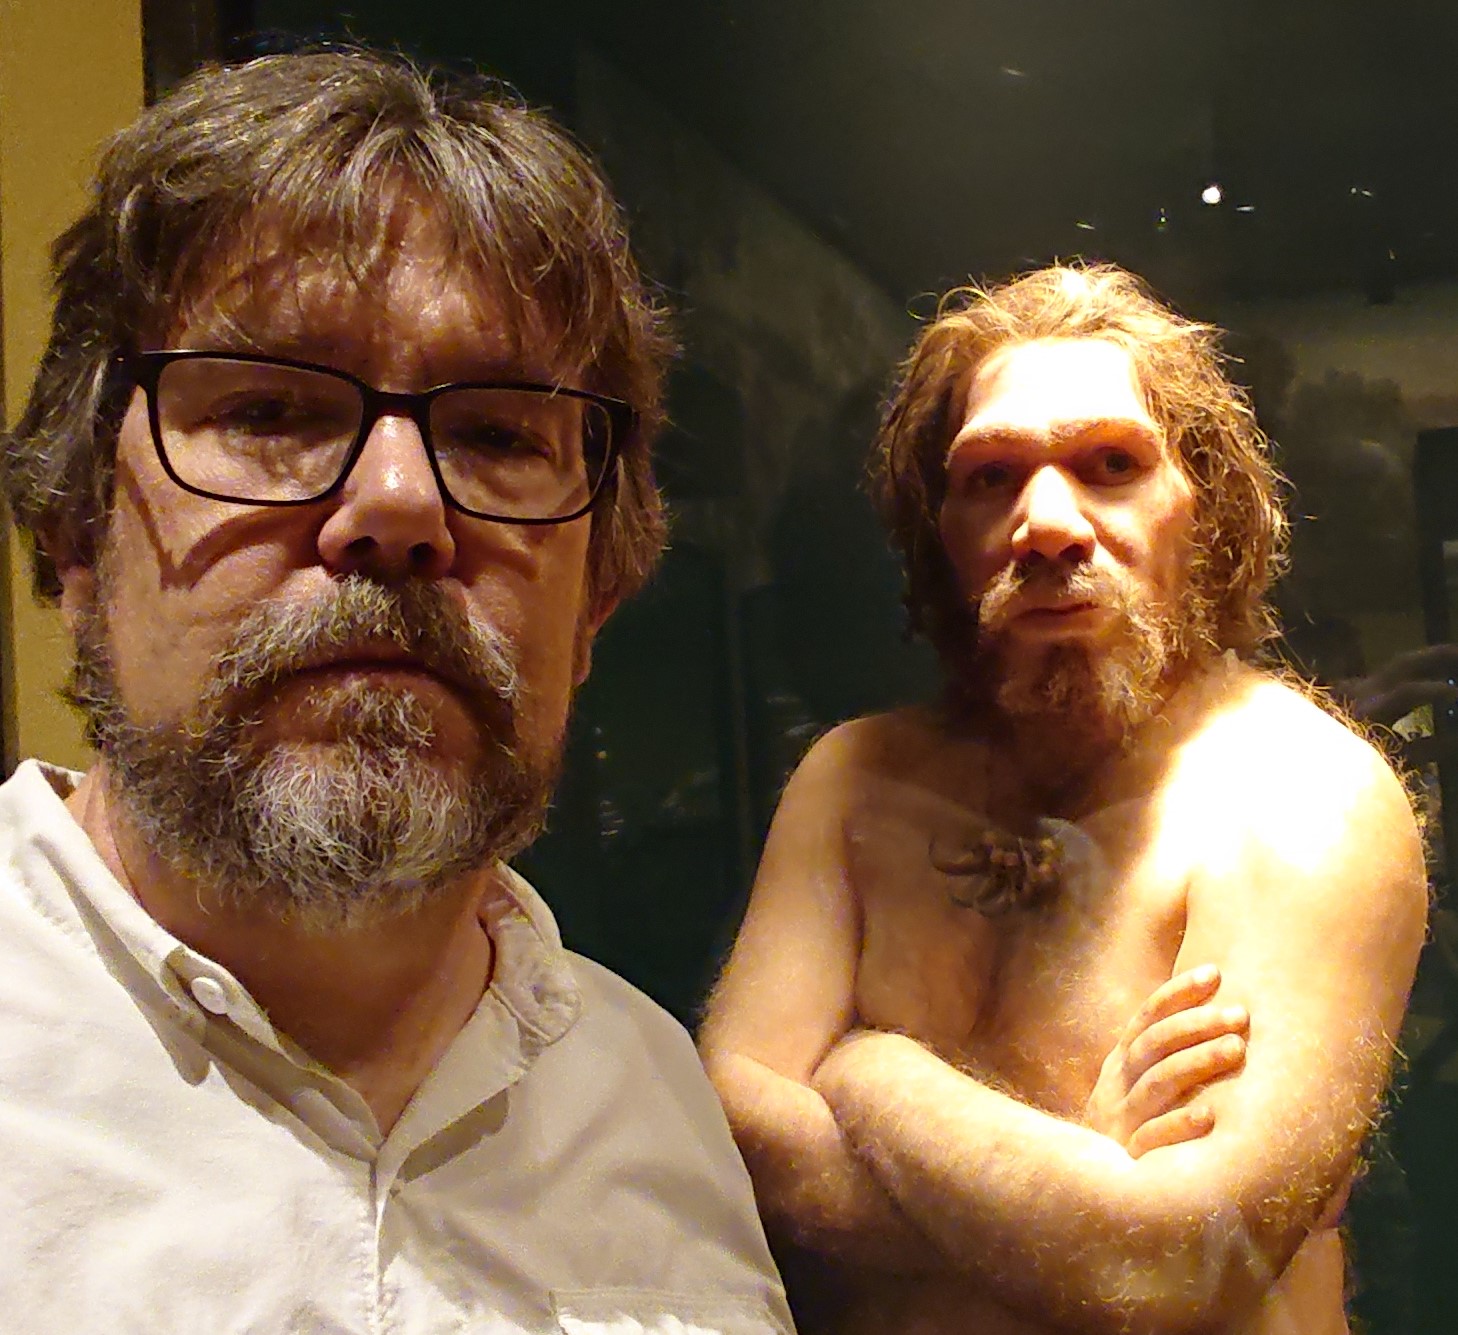 Brian Smith and a Neanderthal friend at The Field Museum